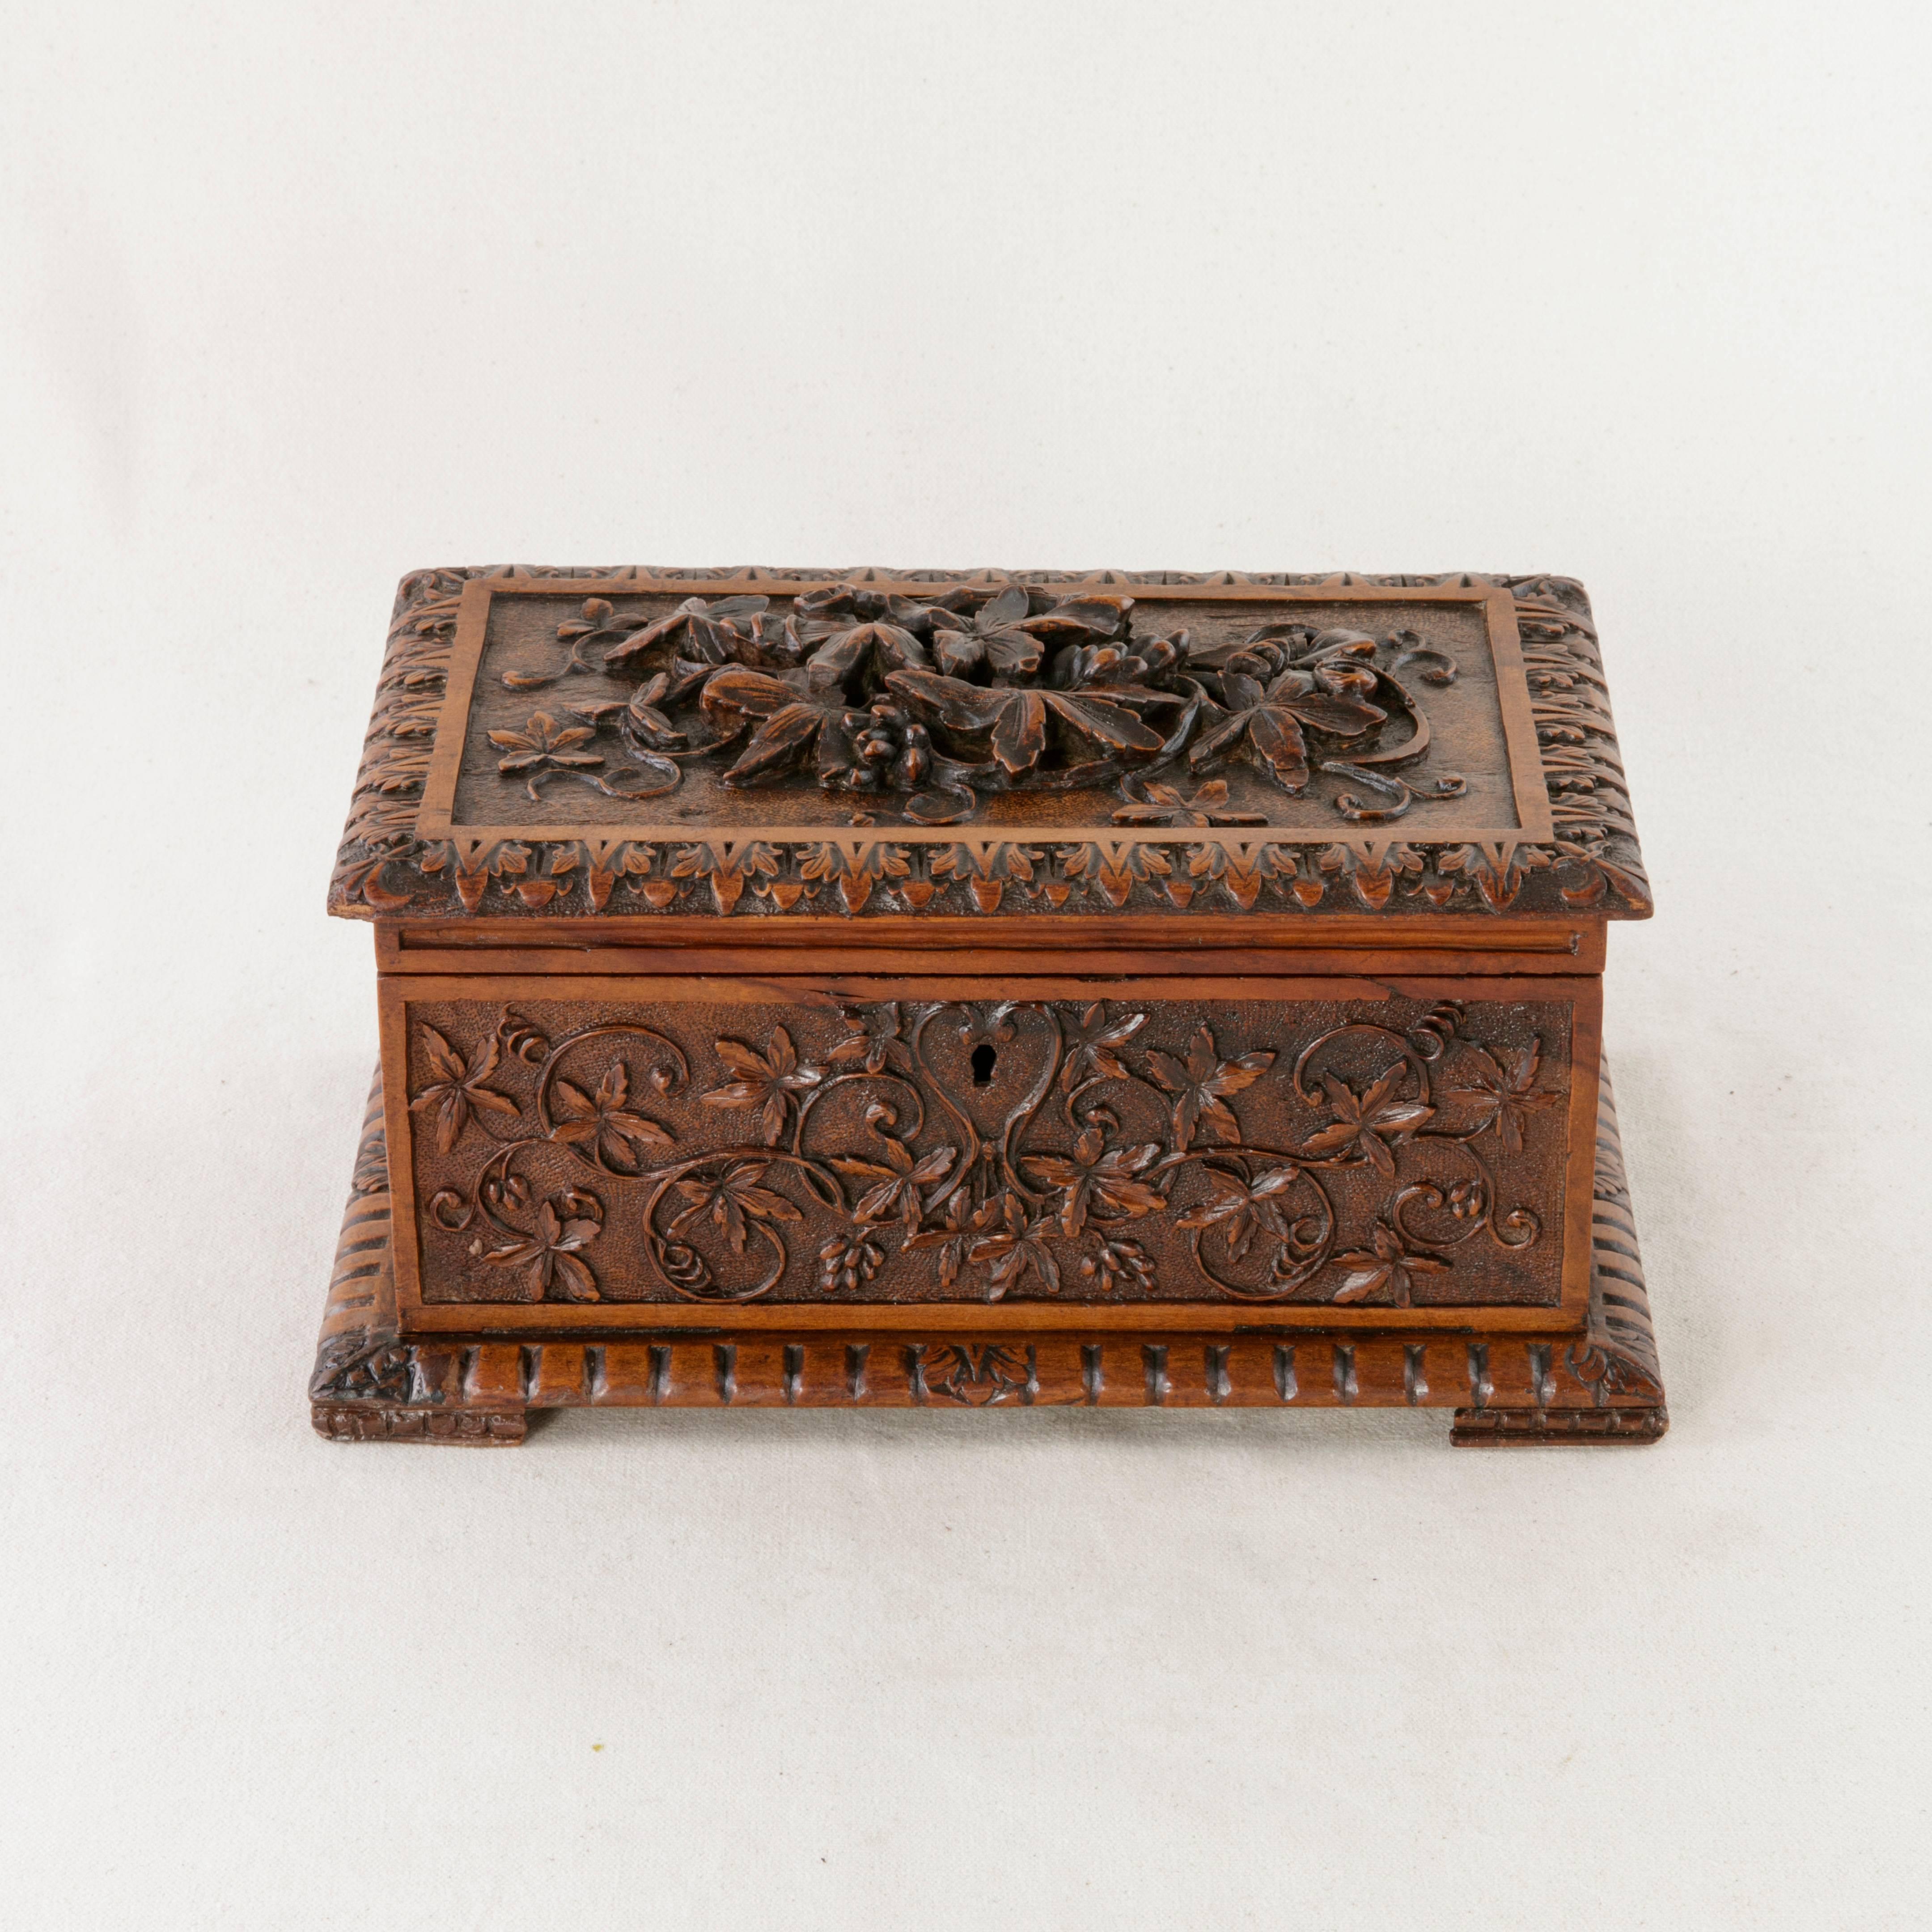 A Classic example of Black Forest artistry, this box features lavish hand carvings on all four sides as well as the top. A border of leaves with fleurs-de-lys corners surrounds the ornate lid. Its center carvings of deep relief include vines,